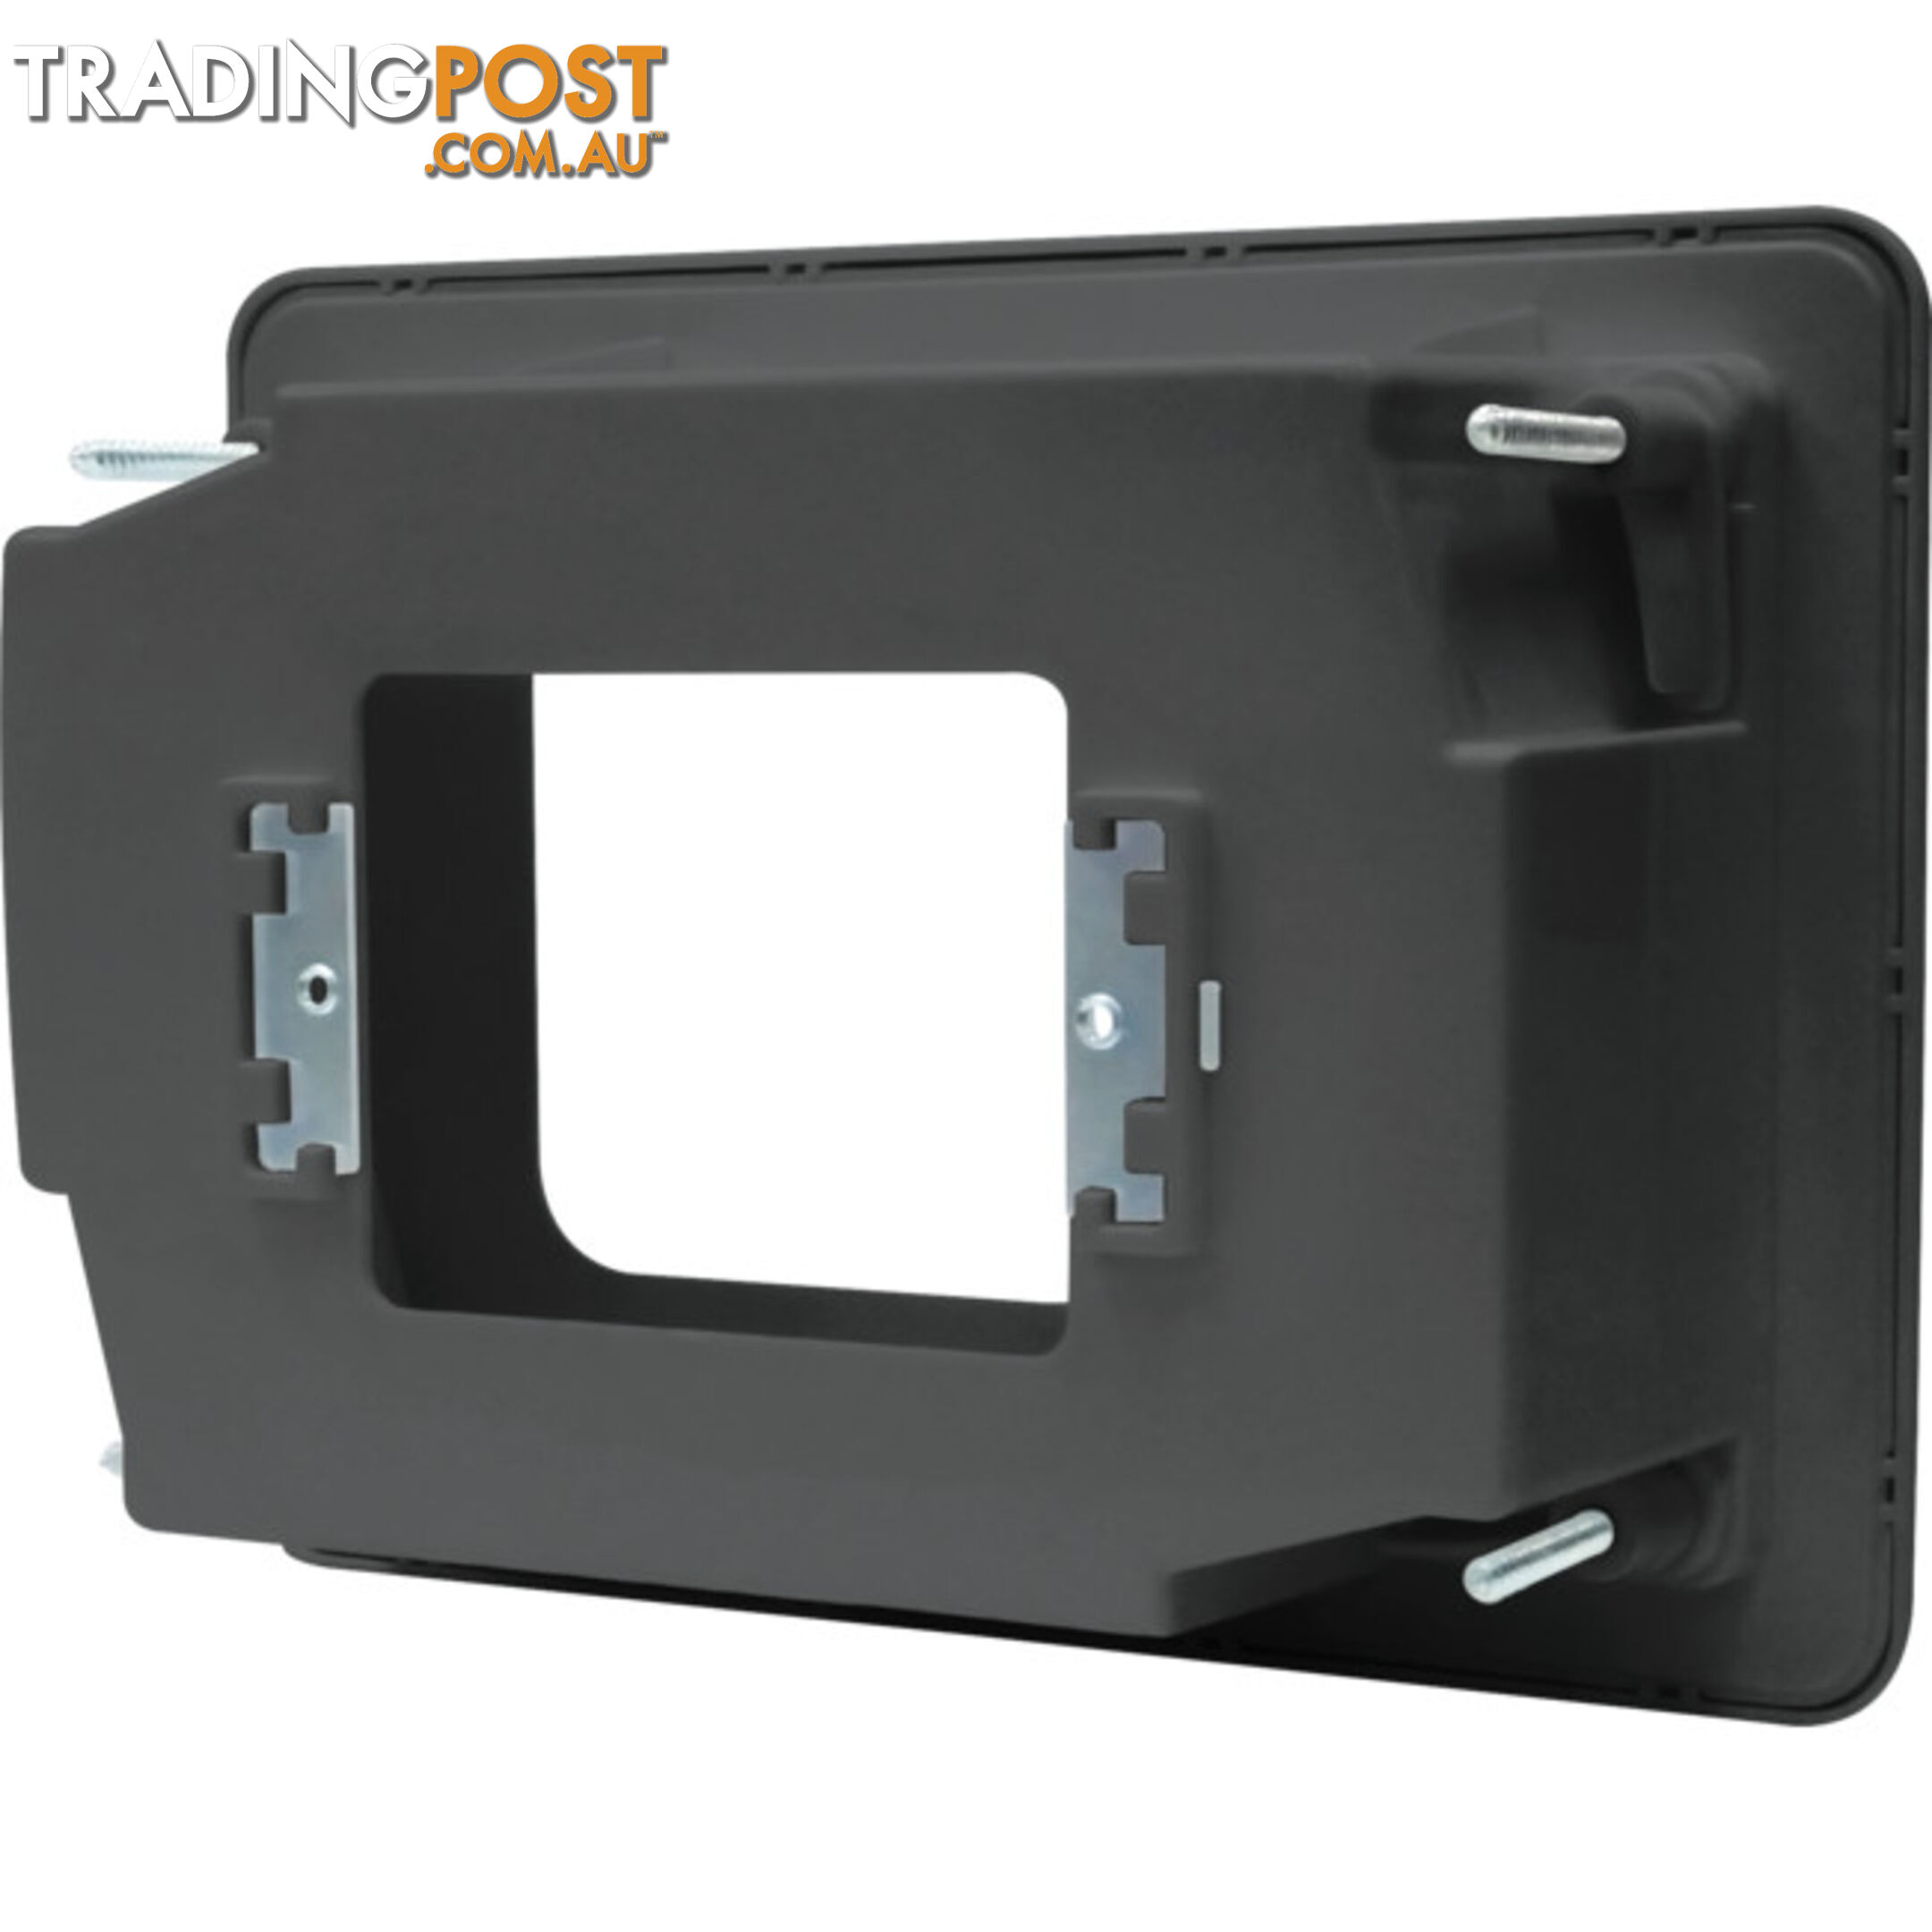 04MM-RP03 RECESSED WALL POINT WITH CABLE MANAGEMENT SYSTEM BLACK